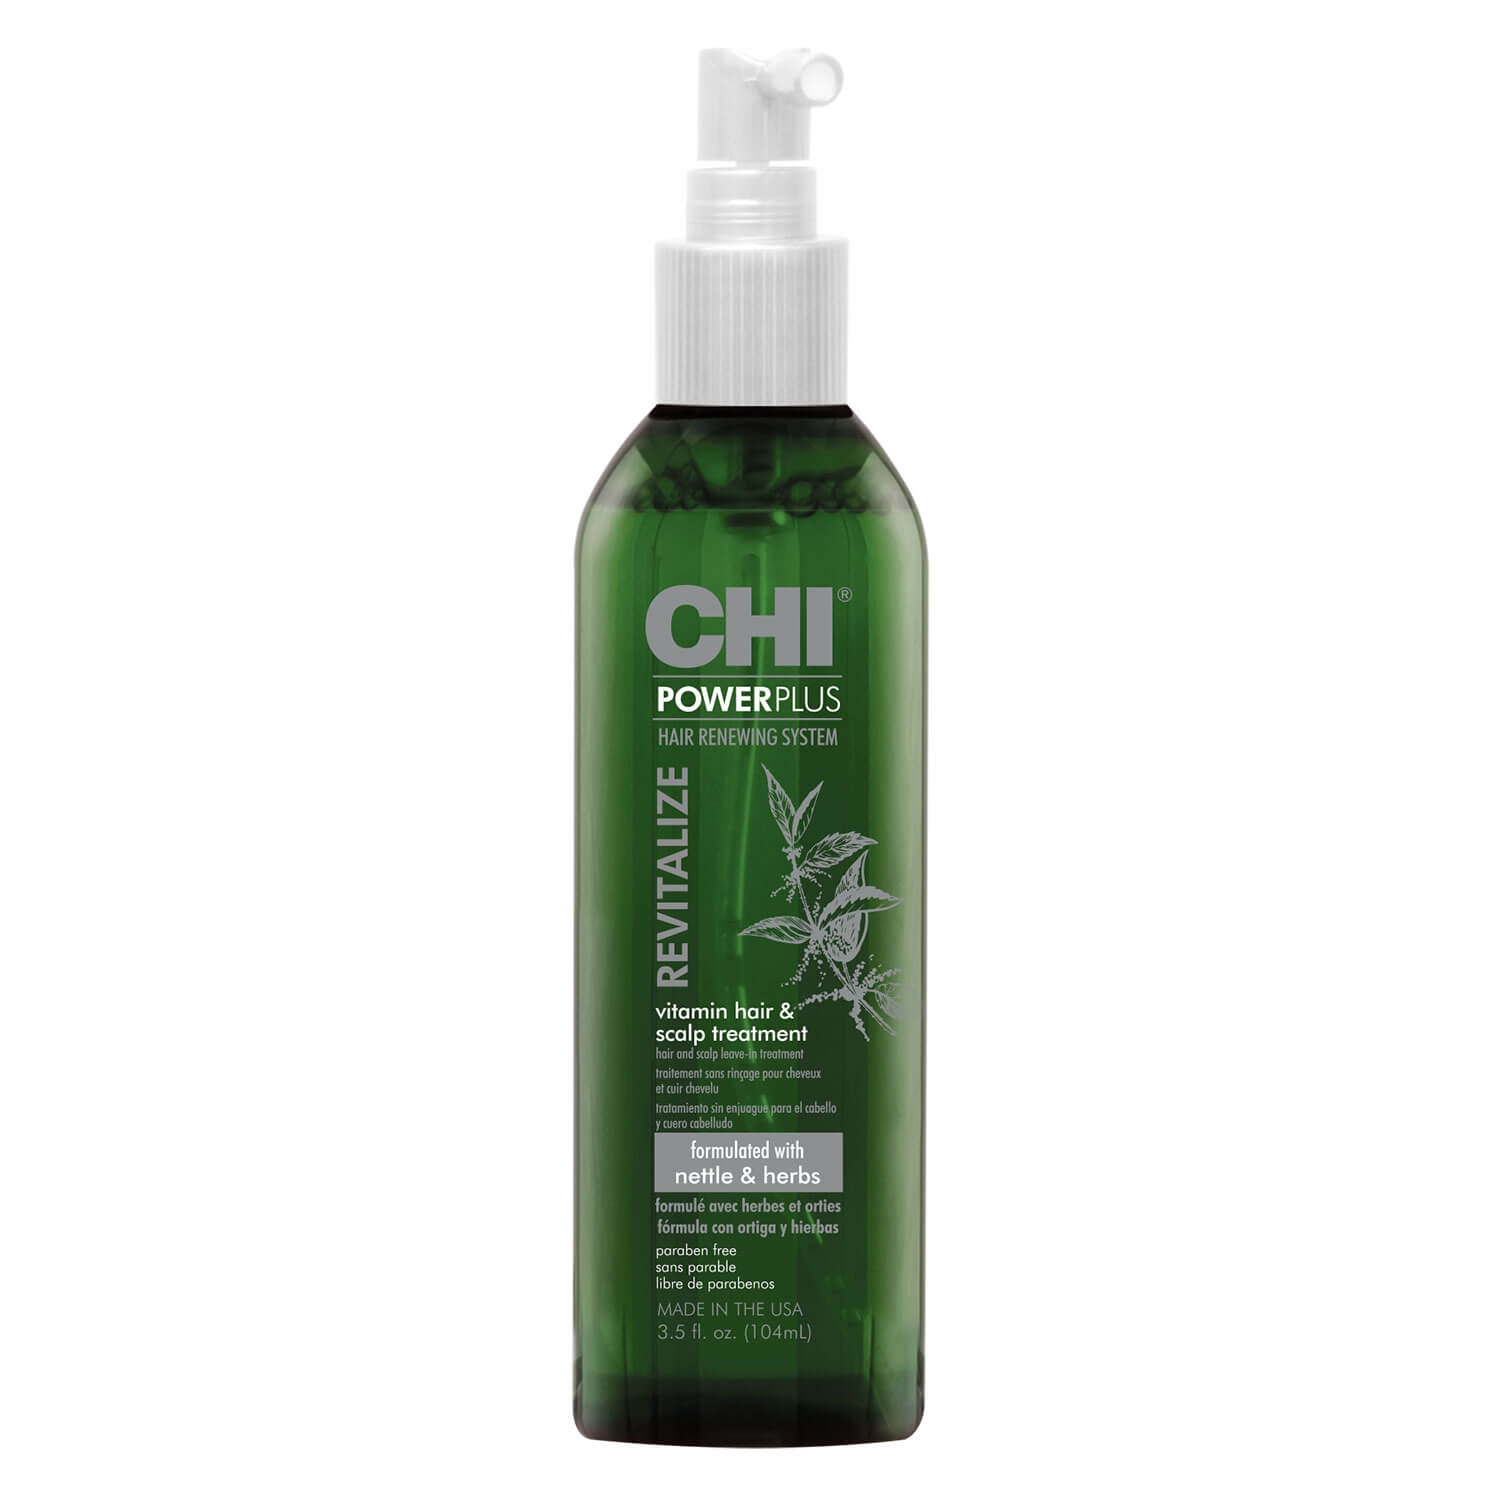 Product image from CHI PowerPlus - Vitamin Hair & Scalp Treatment